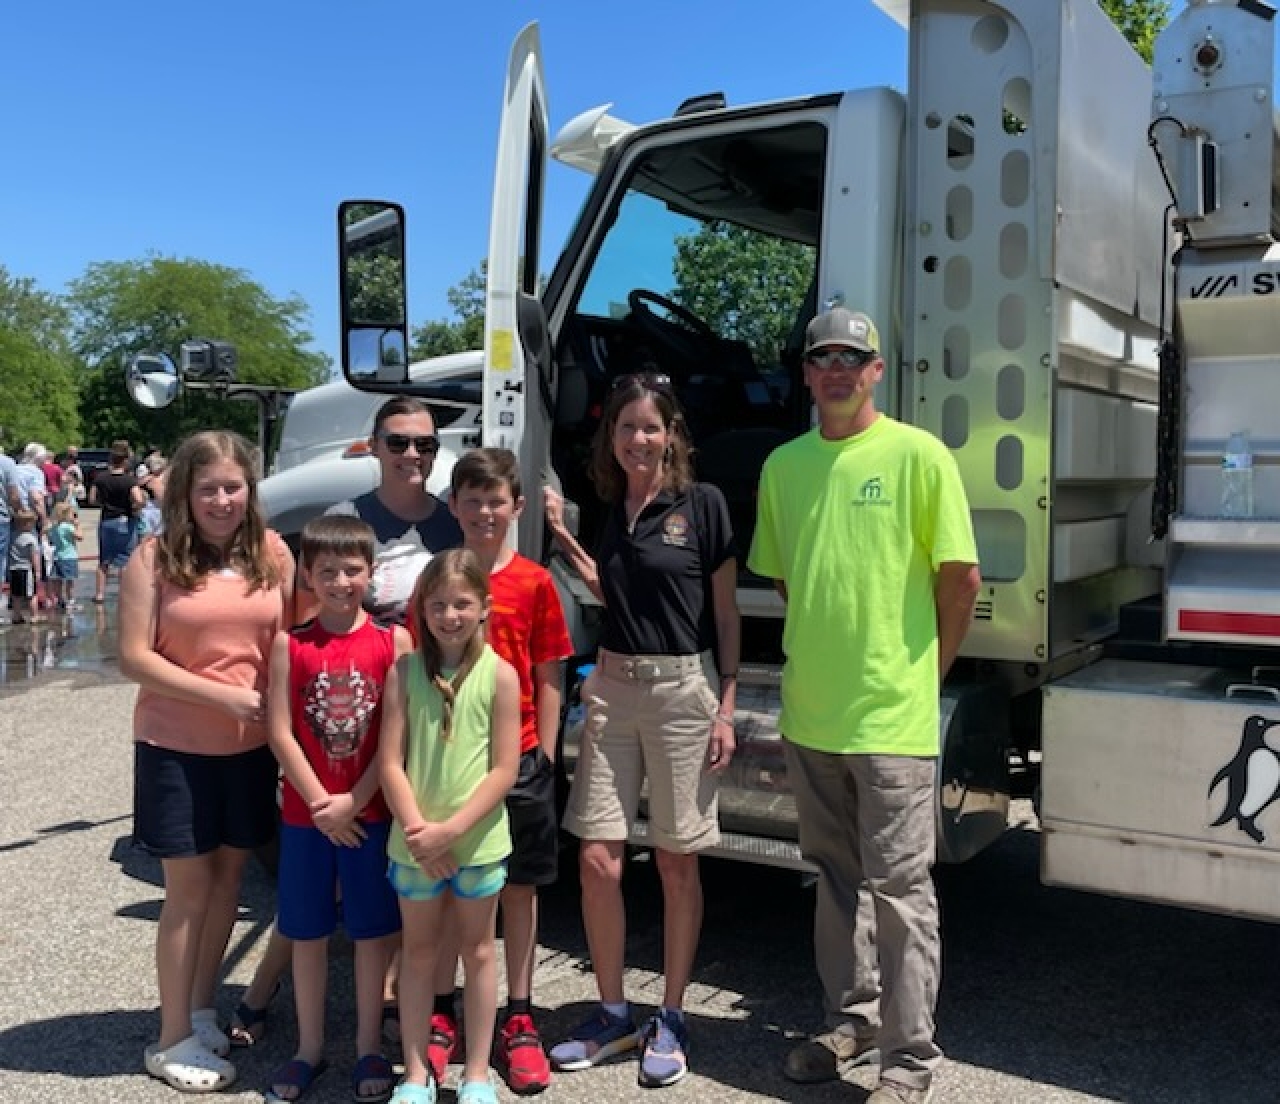 Representative Richardson enjoyed meeting the DiFilippantonio family at the Touch-A-Truck event. She was excited to learn that their dad is a law enforcement officer.